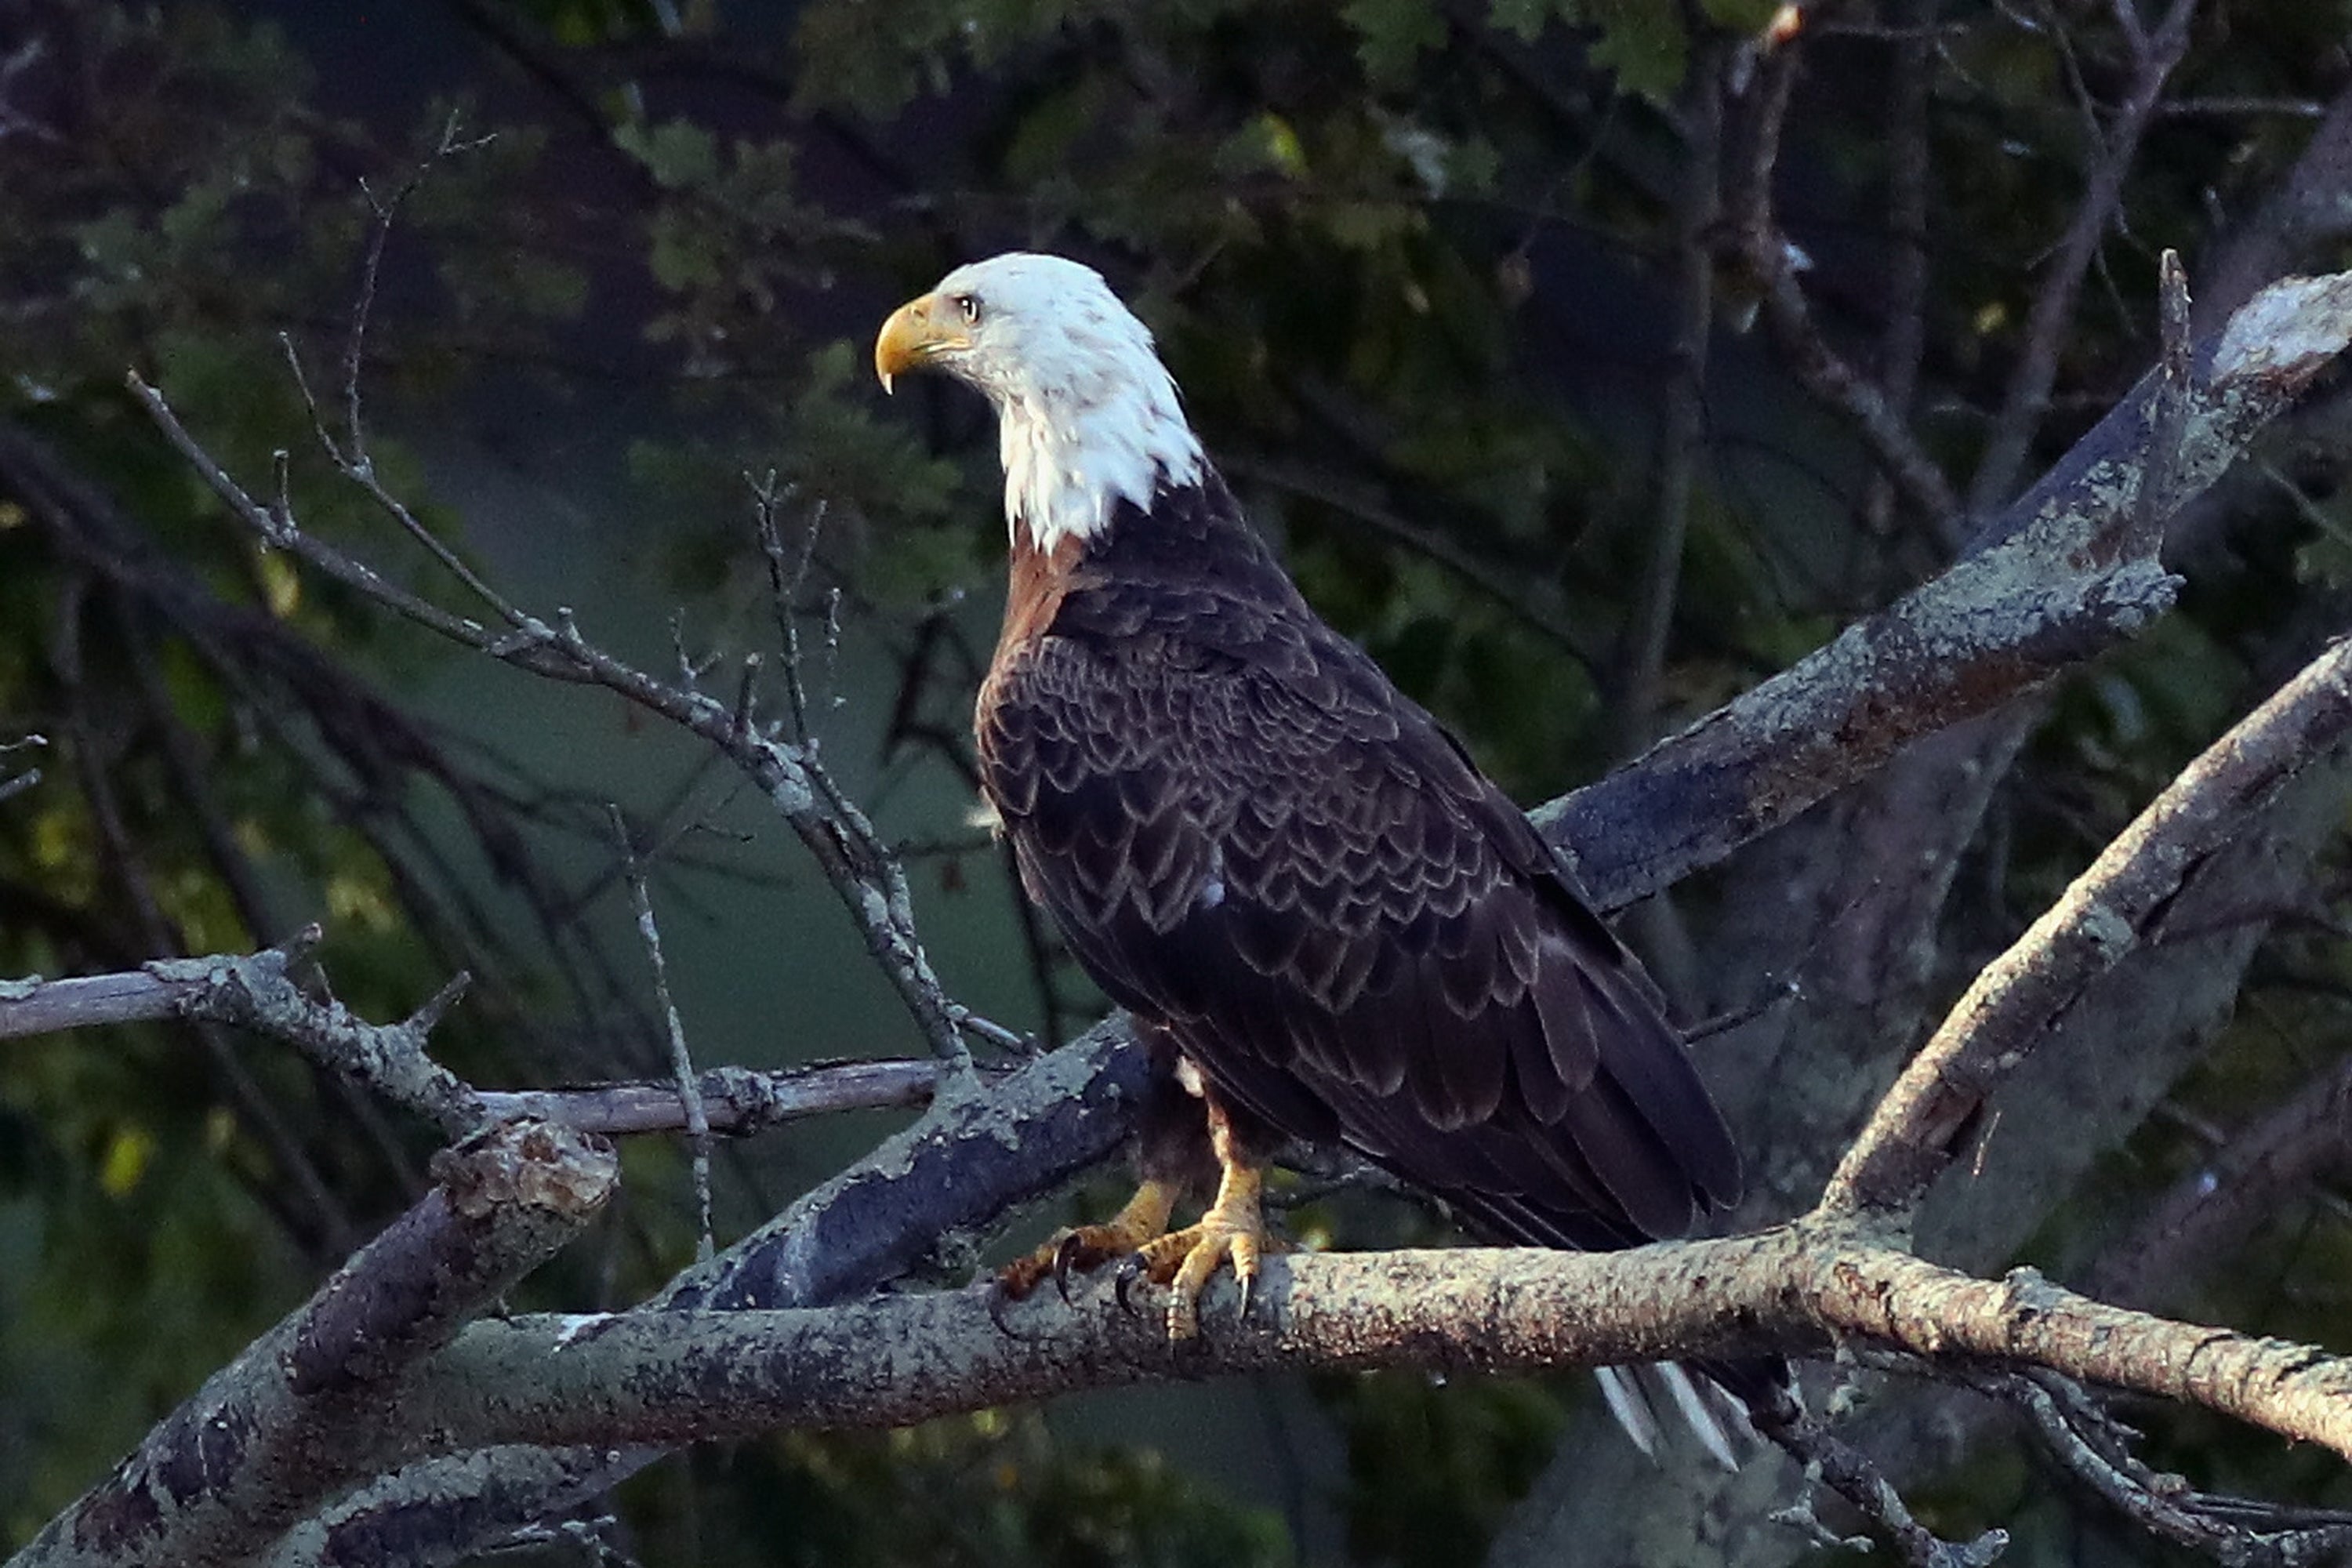 An American bald eagle sits on a branch at Mill Pond on July 21, 2018 in Centerport, New York.